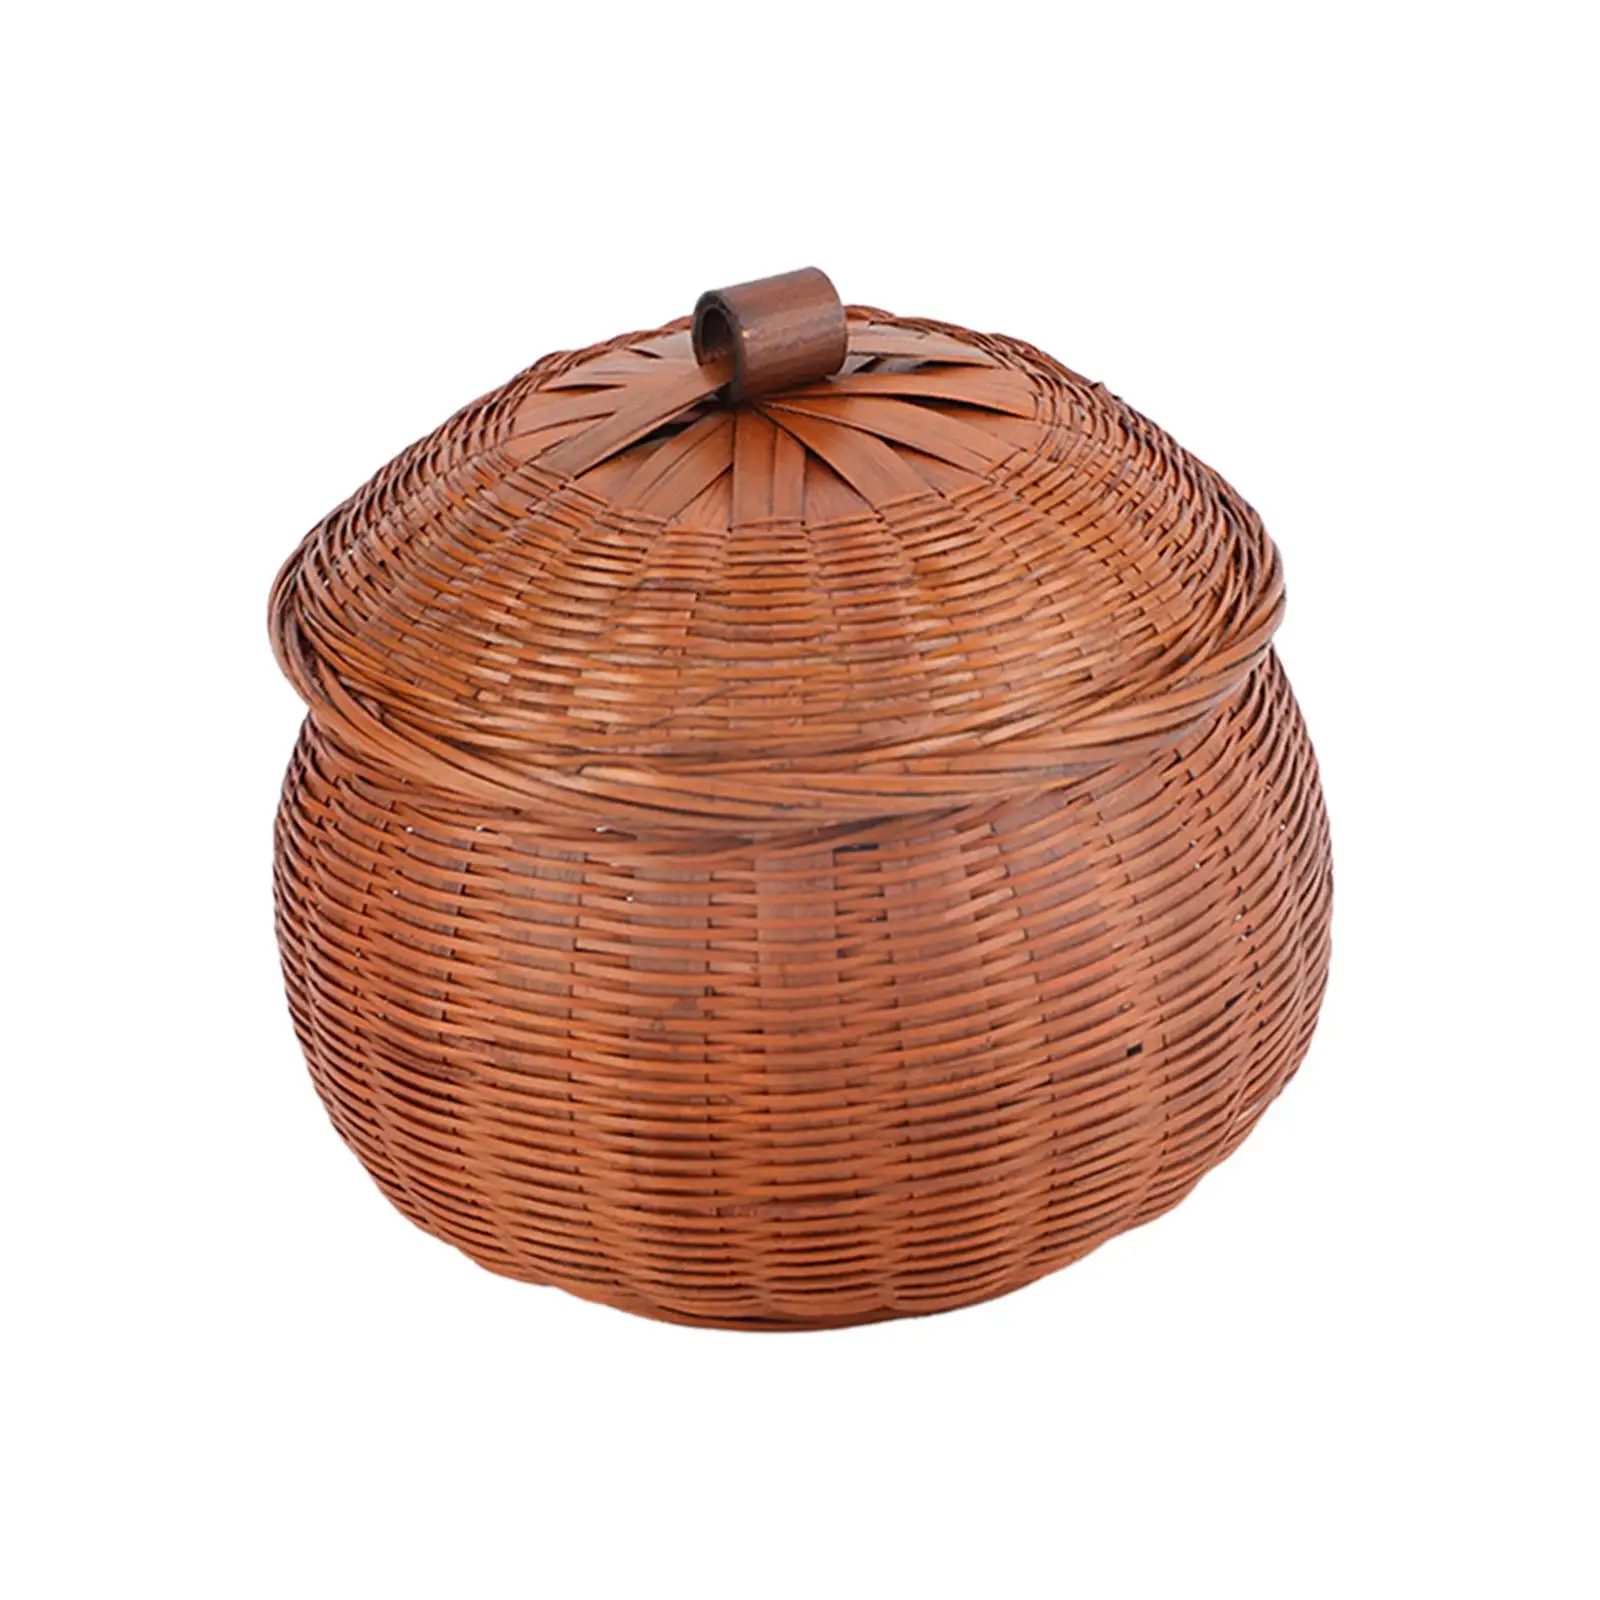 Round Rattan Storage Box Food Serving Tray Egg Basket Smooth Practical for Restaurant Cake Shops Dining Table Cafe